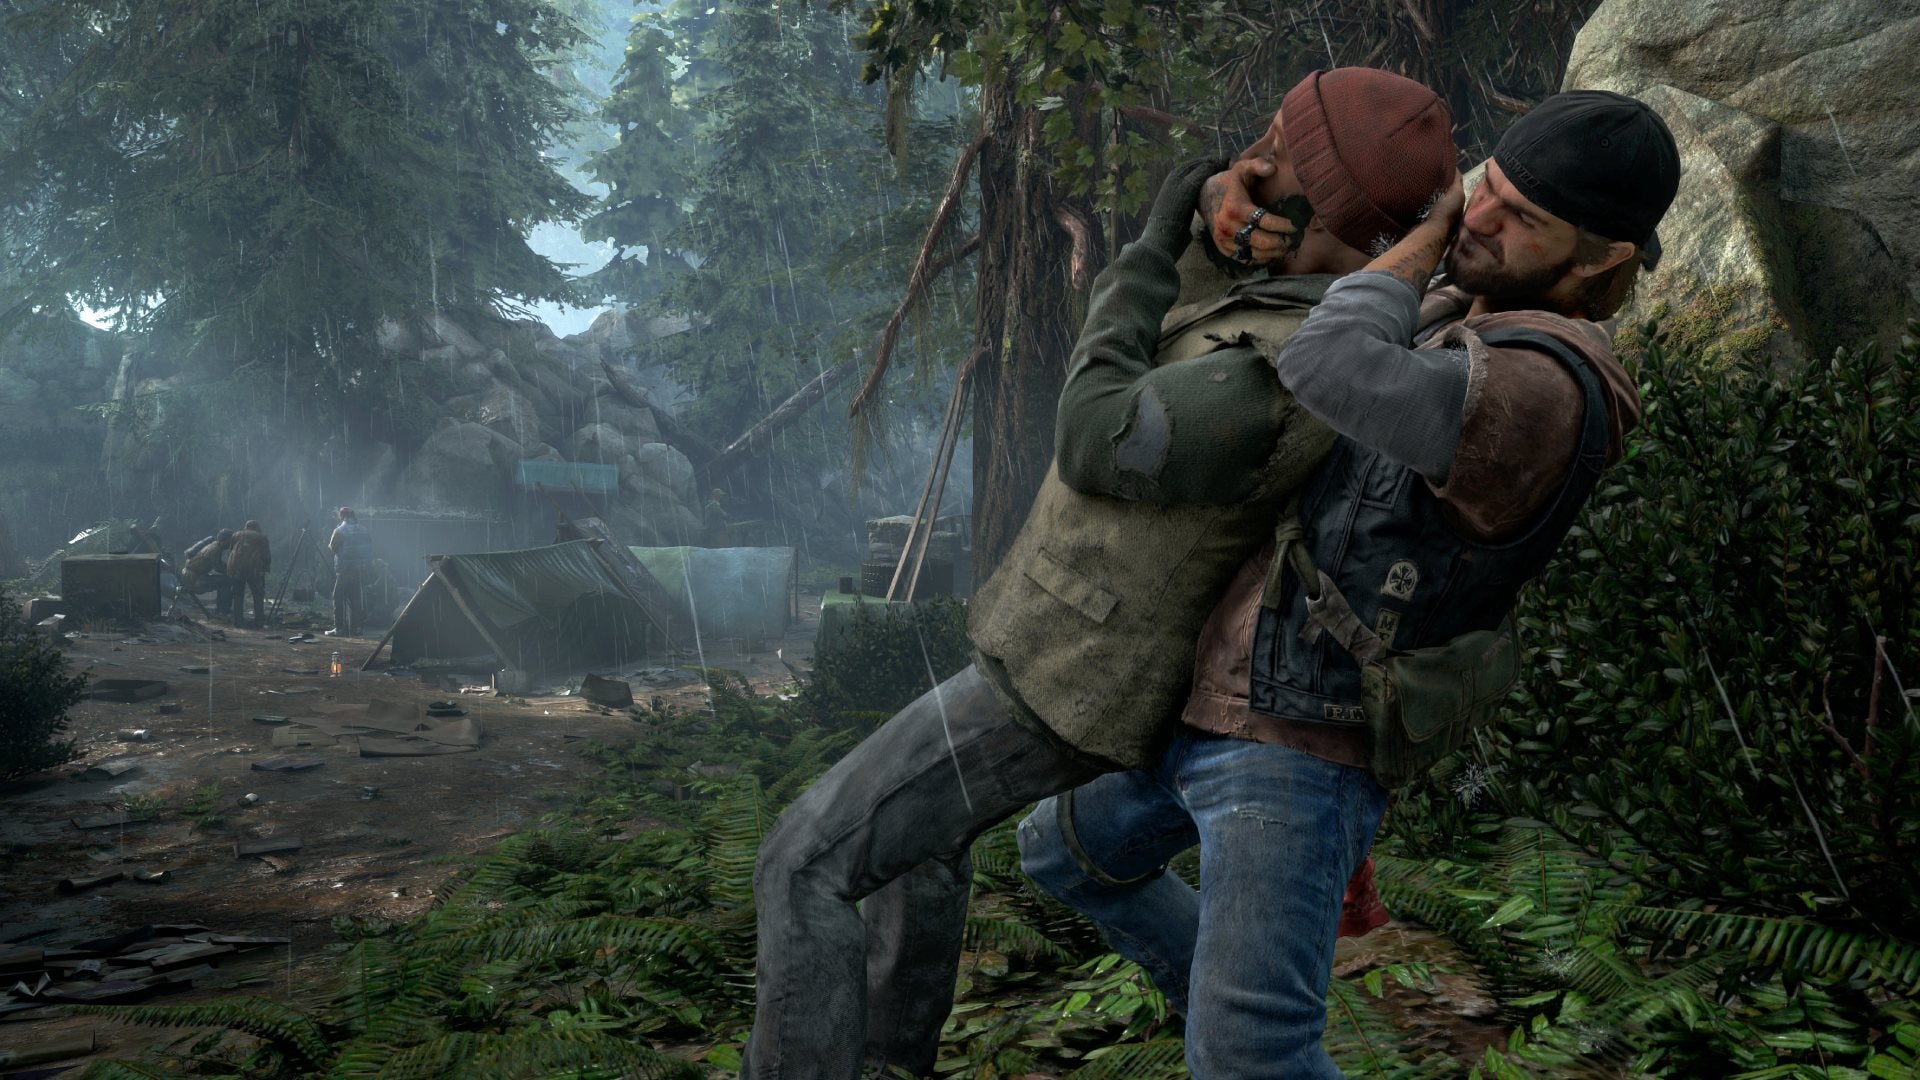 Days Gone 2 could've gotten released in April 2023 according to the Game  Director : r/DaysGone